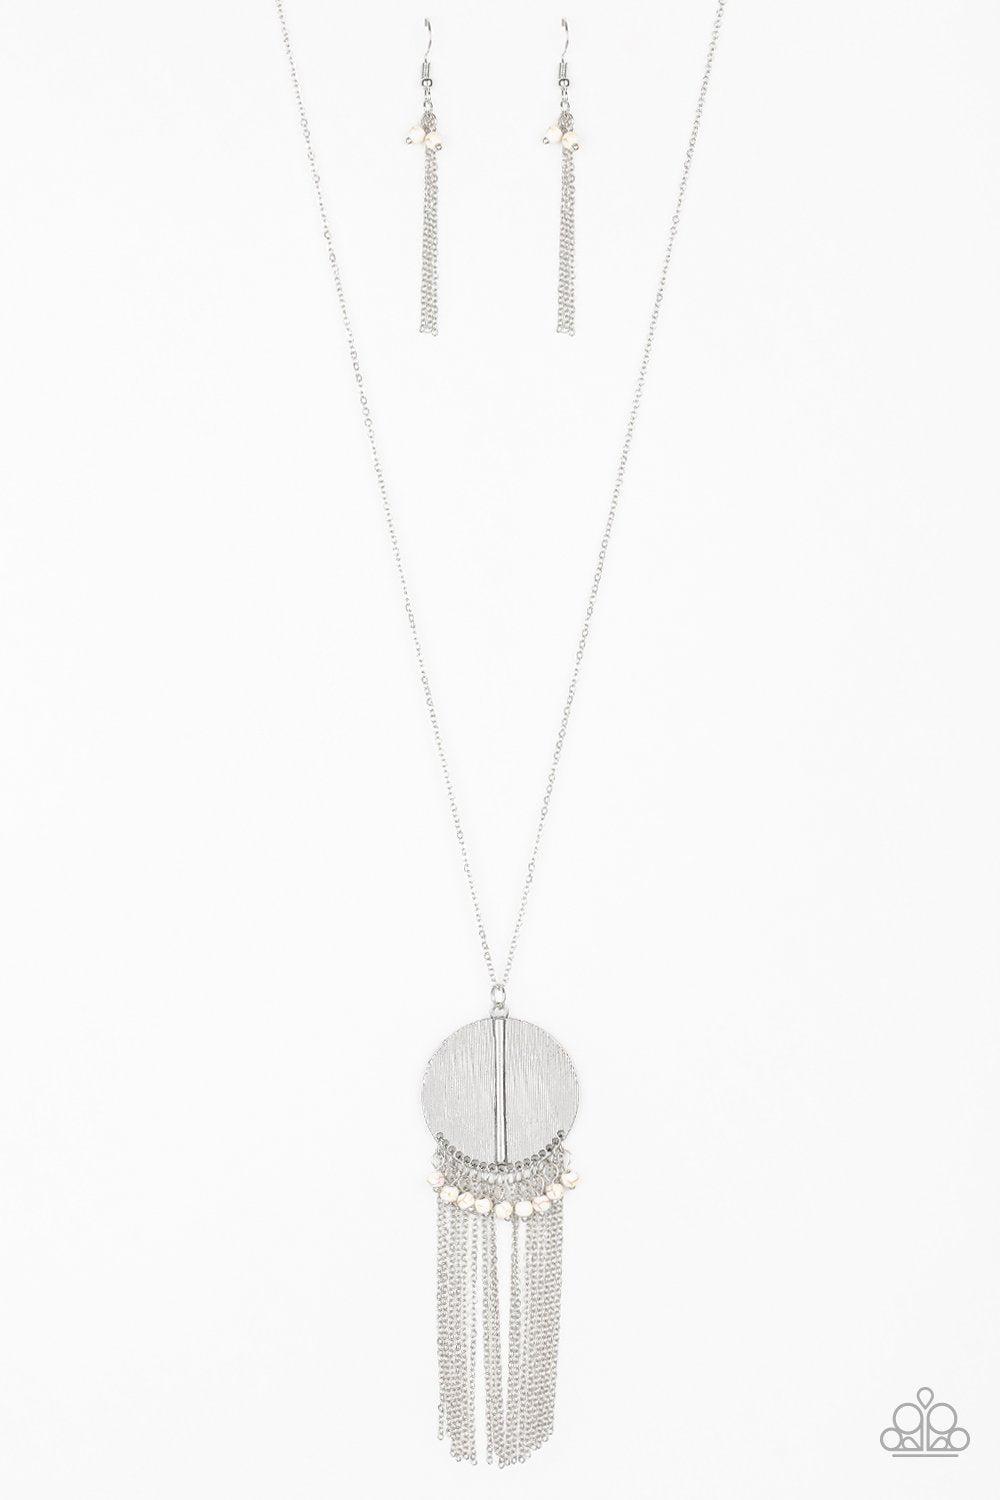 Get a ROAM White Necklace - Paparazzi Accessories - lightbox -CarasShop.com - $5 Jewelry by Cara Jewels